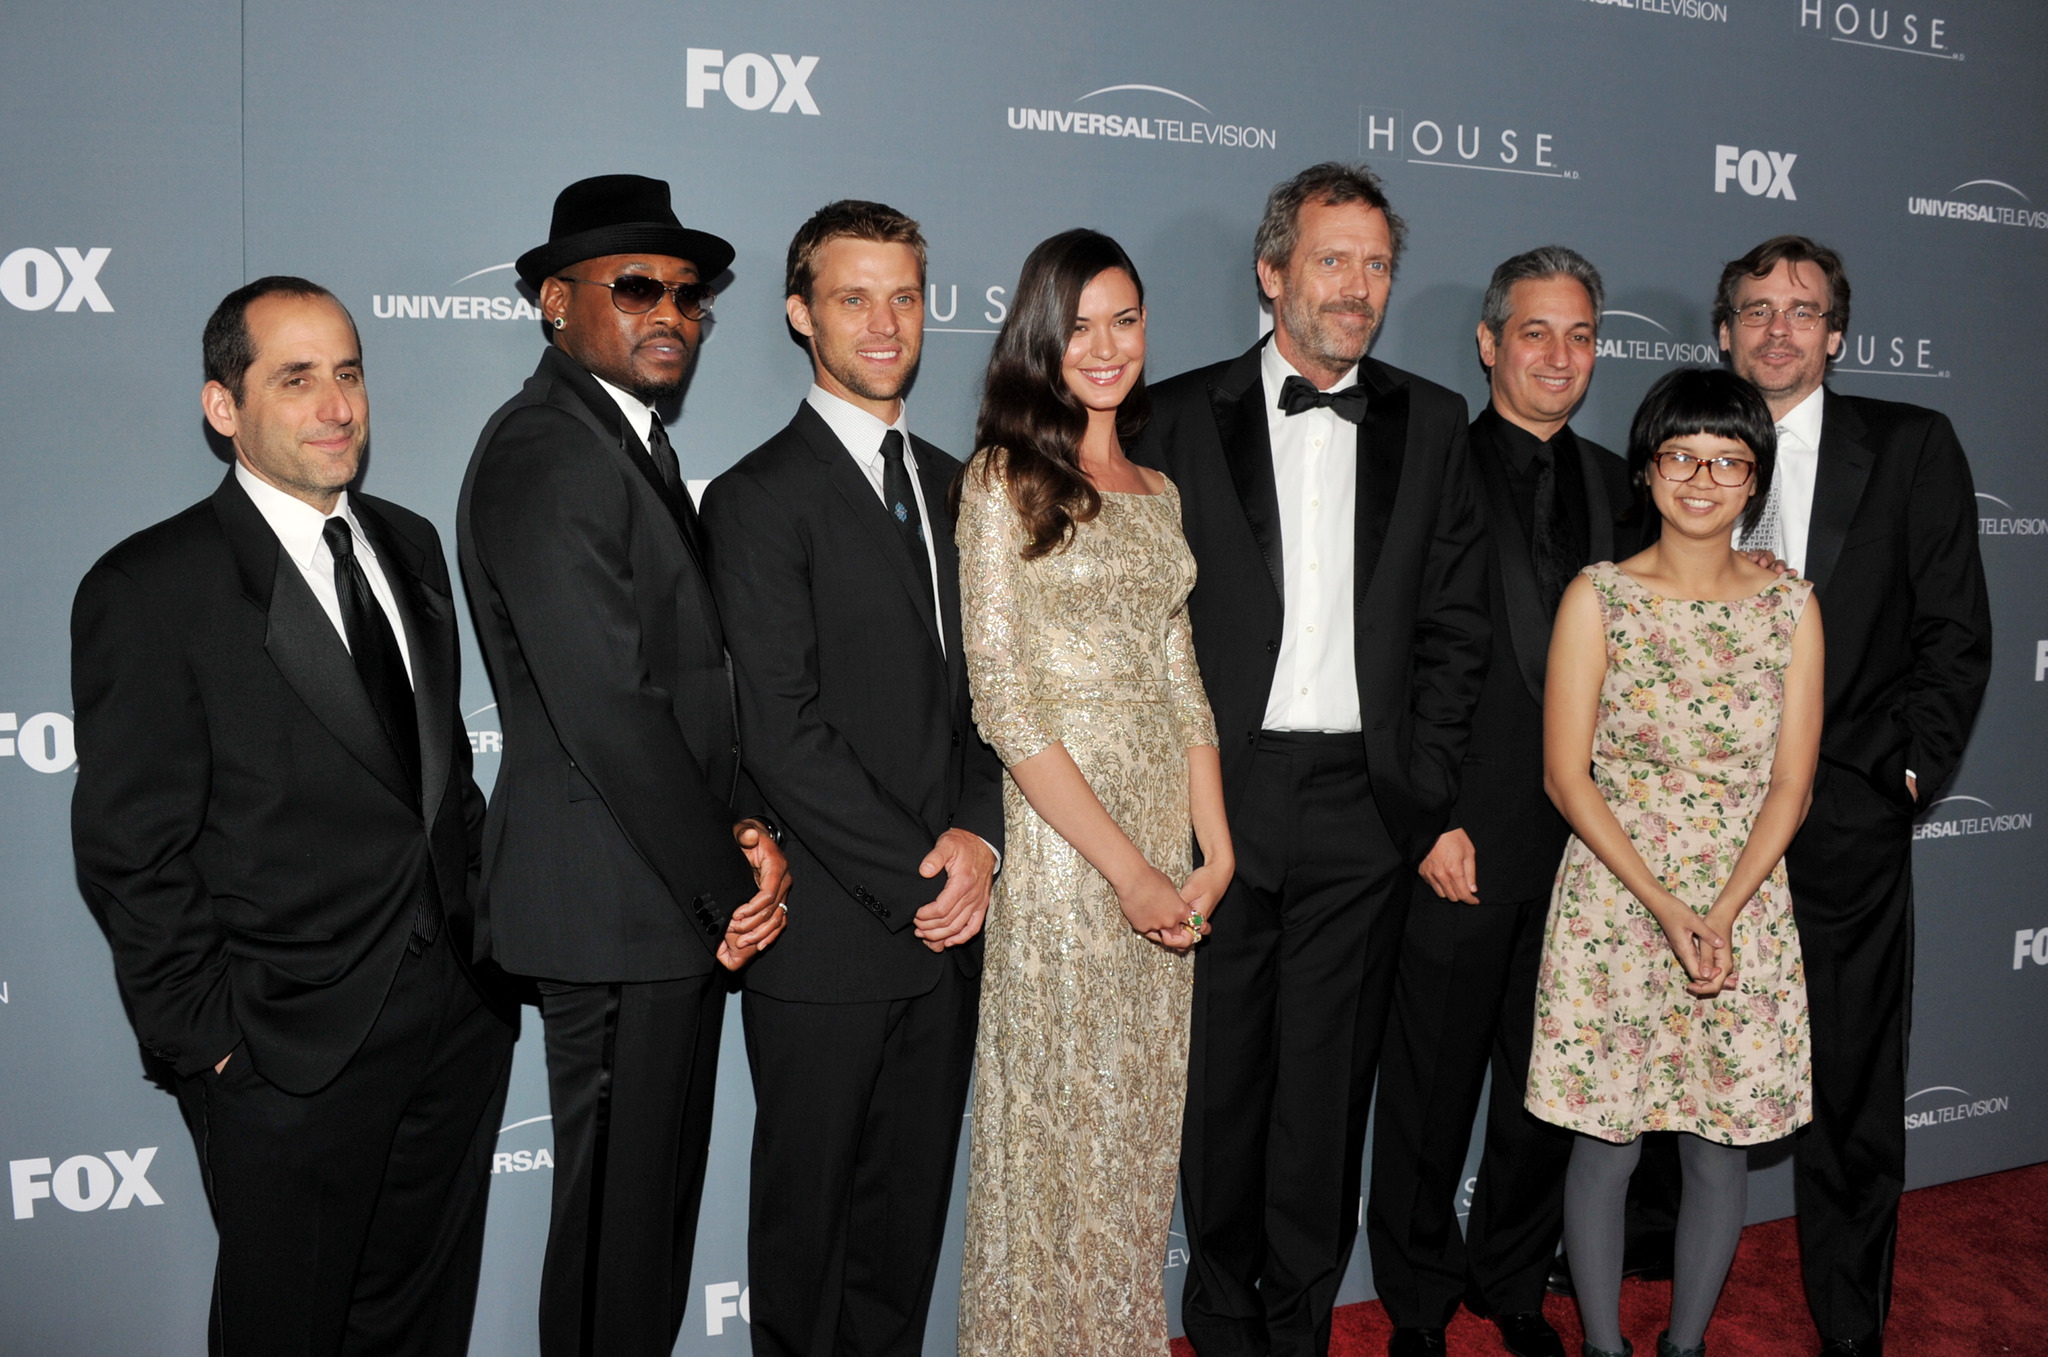 Robert Sean Leonard, Omar Epps, Peter Jacobson, Hugh Laurie, David Shore, Jesse Spencer, Odette Annable and Charlyne Yi at event of Hausas (2004)